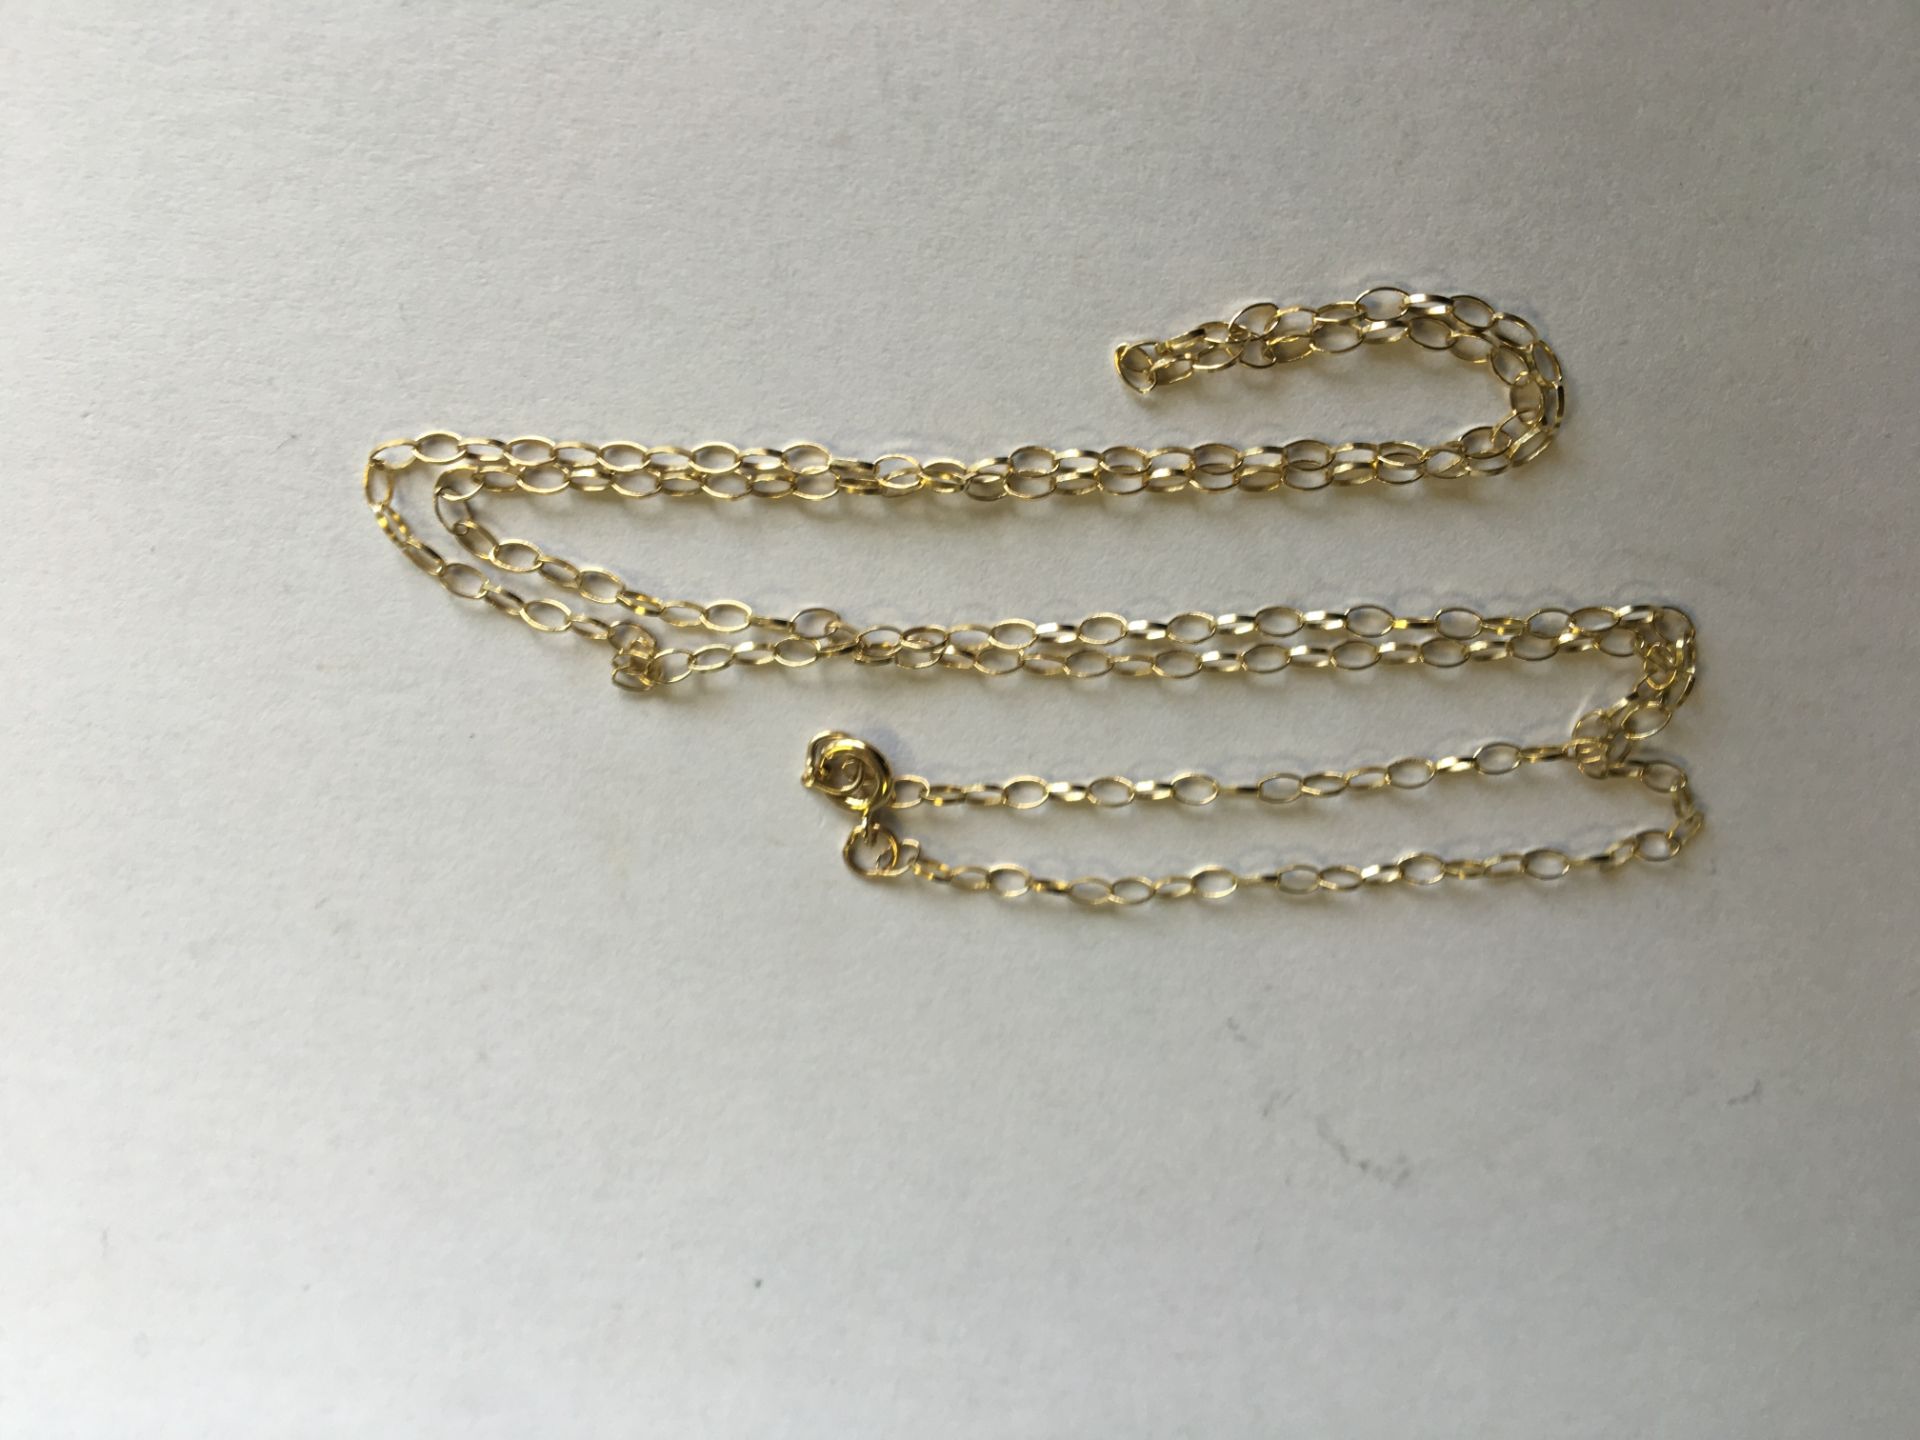 A HALLMARKED 9CT GOLD BELCHER CHAIN NECKLACE. 16" FREE UK DELIVERY. NO VAT.